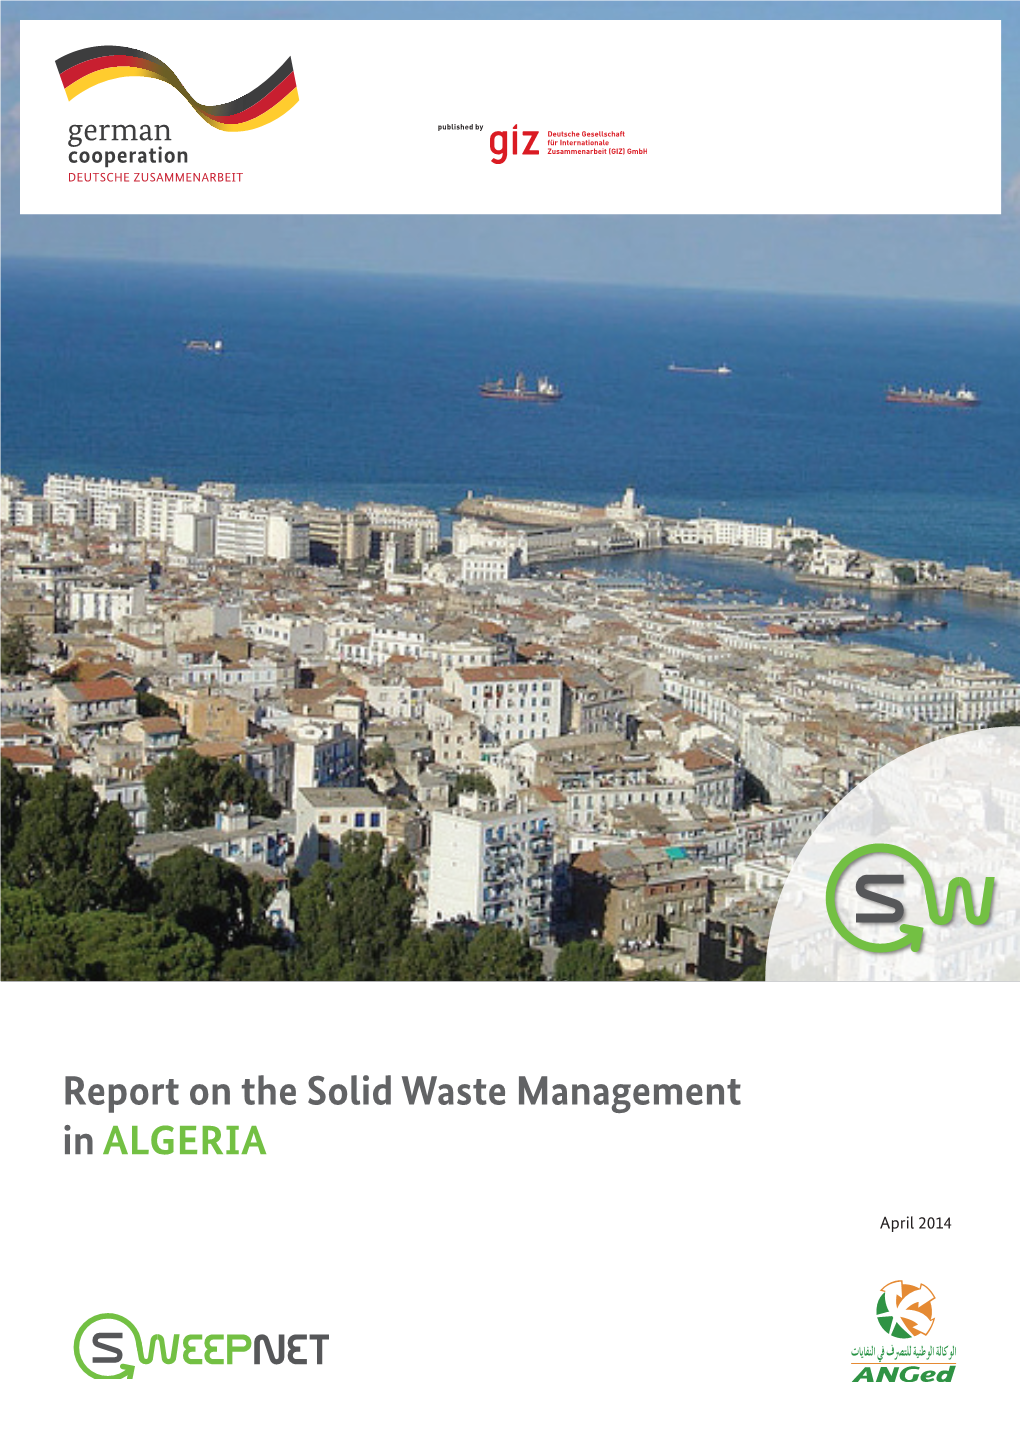 Report on the Solid Waste Management in Algeria